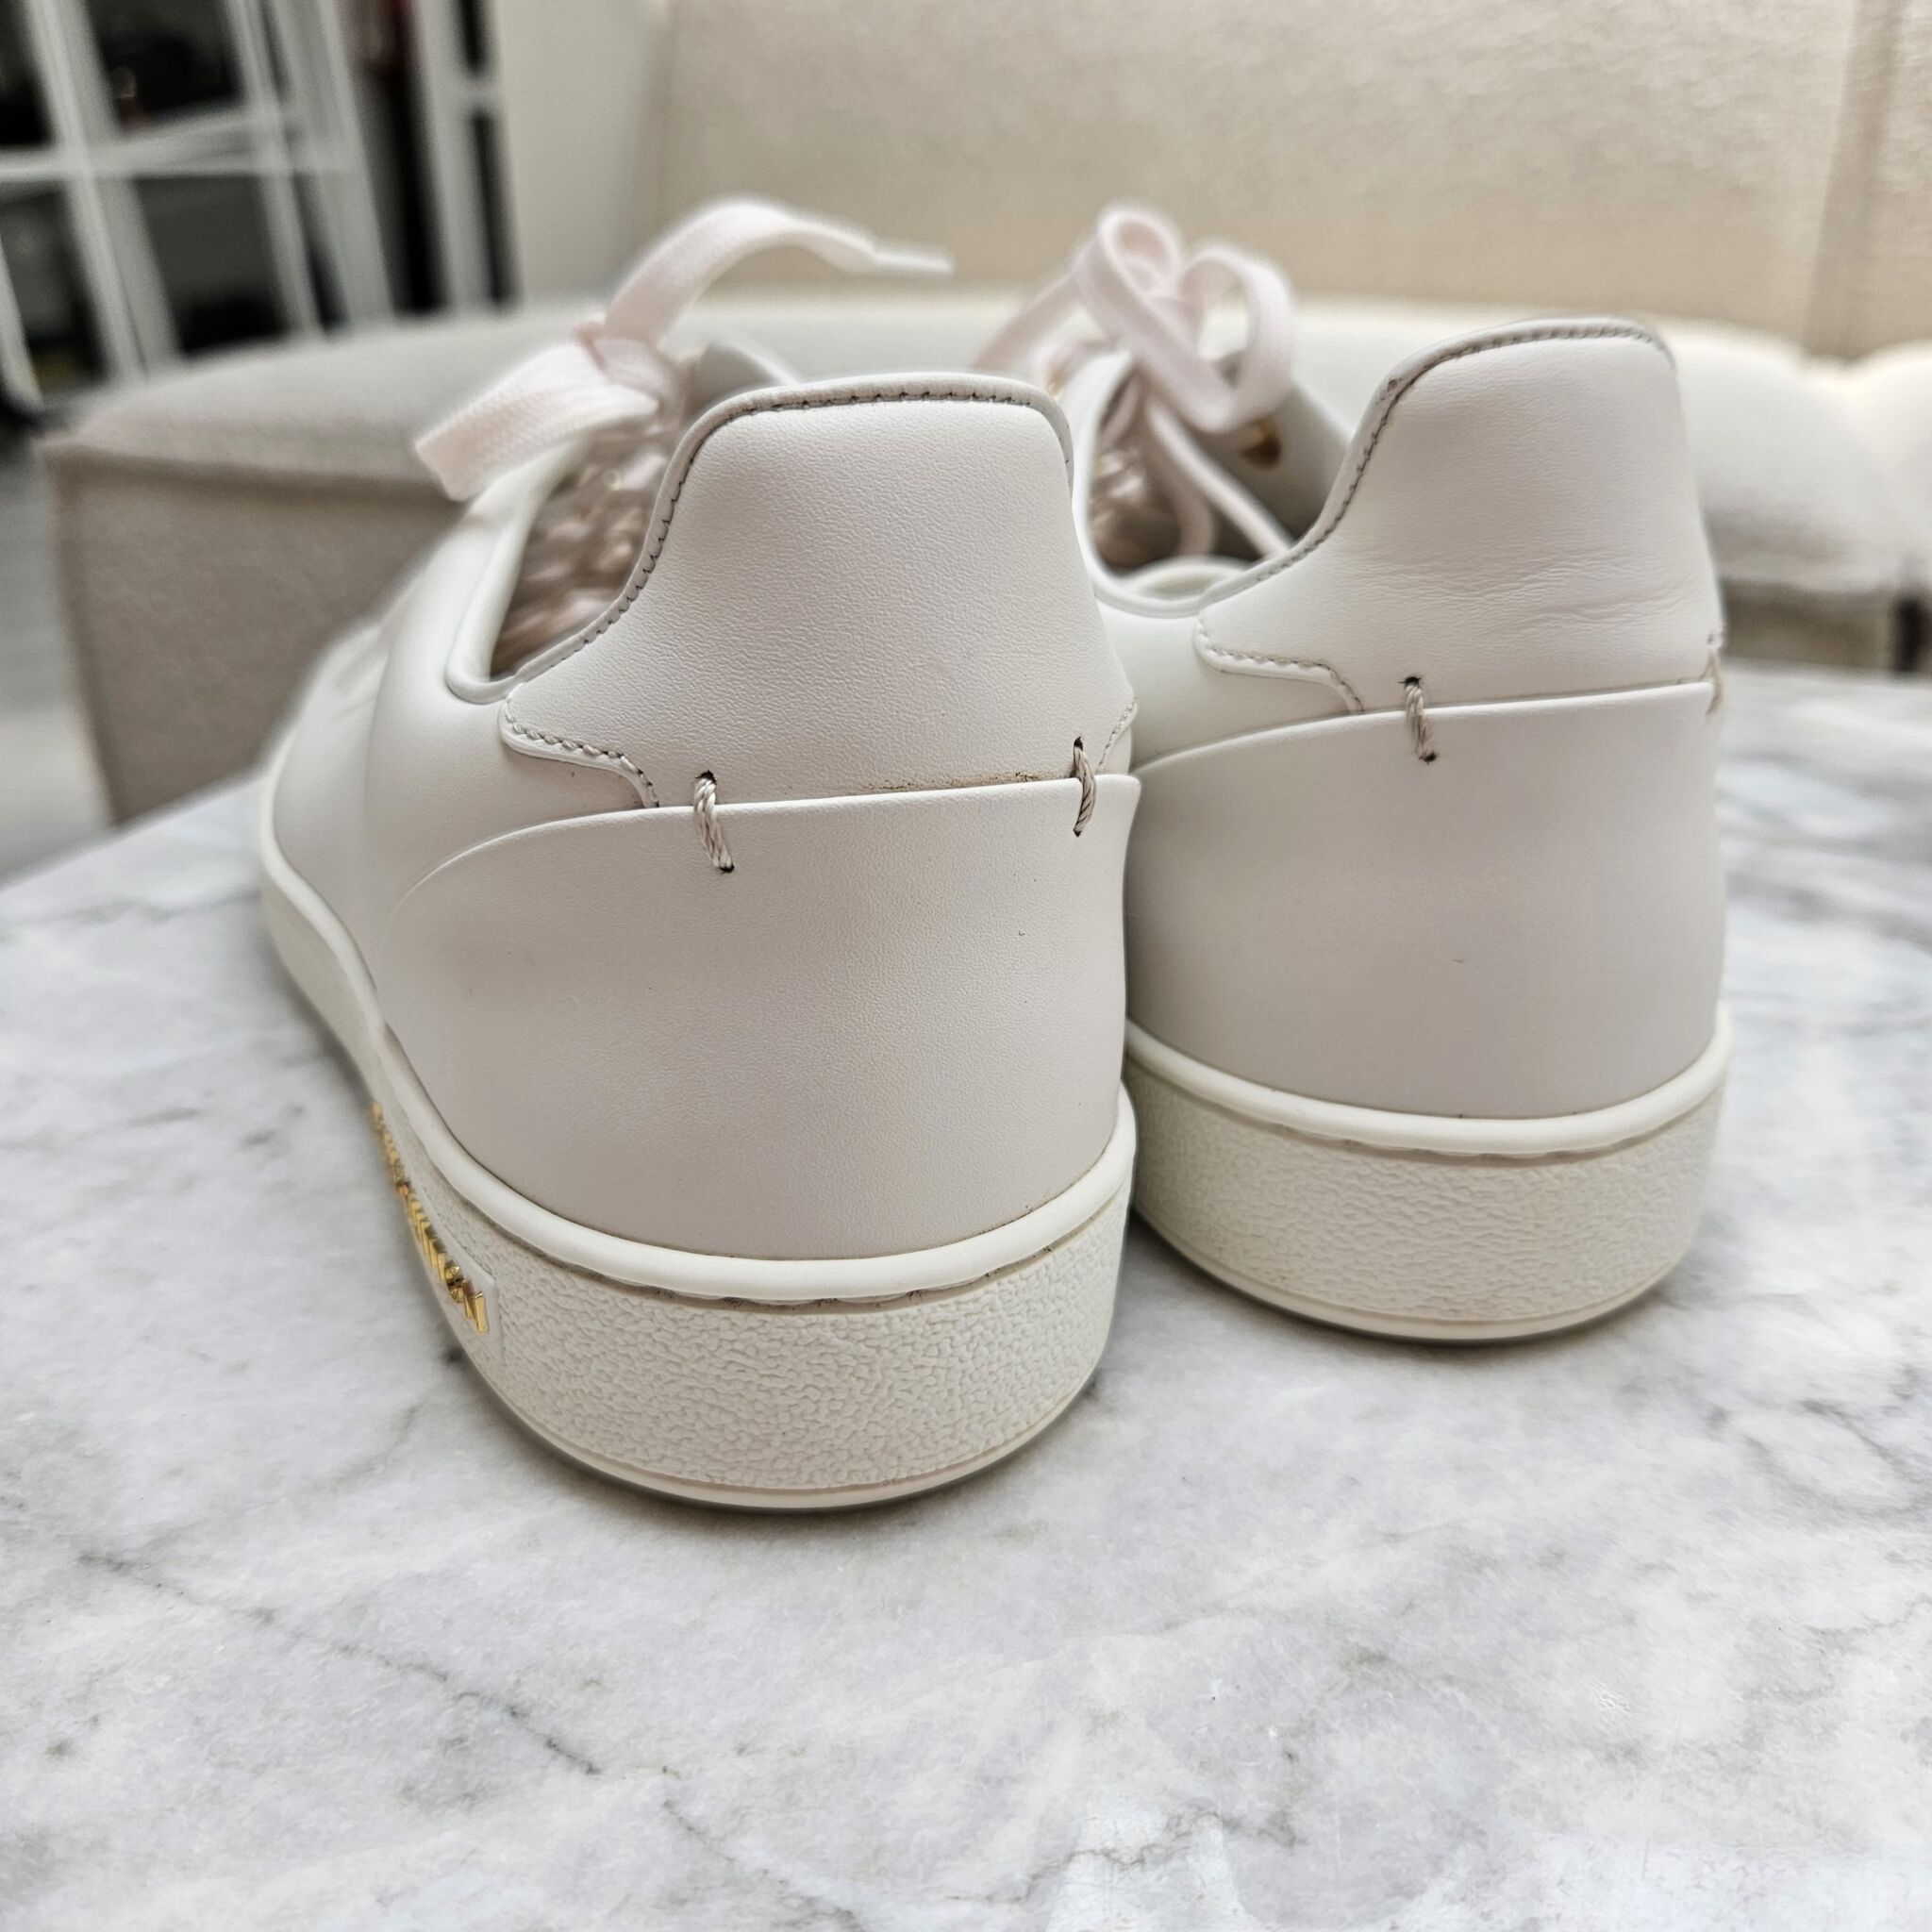 Louis Vuitton Frontrow Trainer, Calfskin, White/Gold, 38 - Laulay